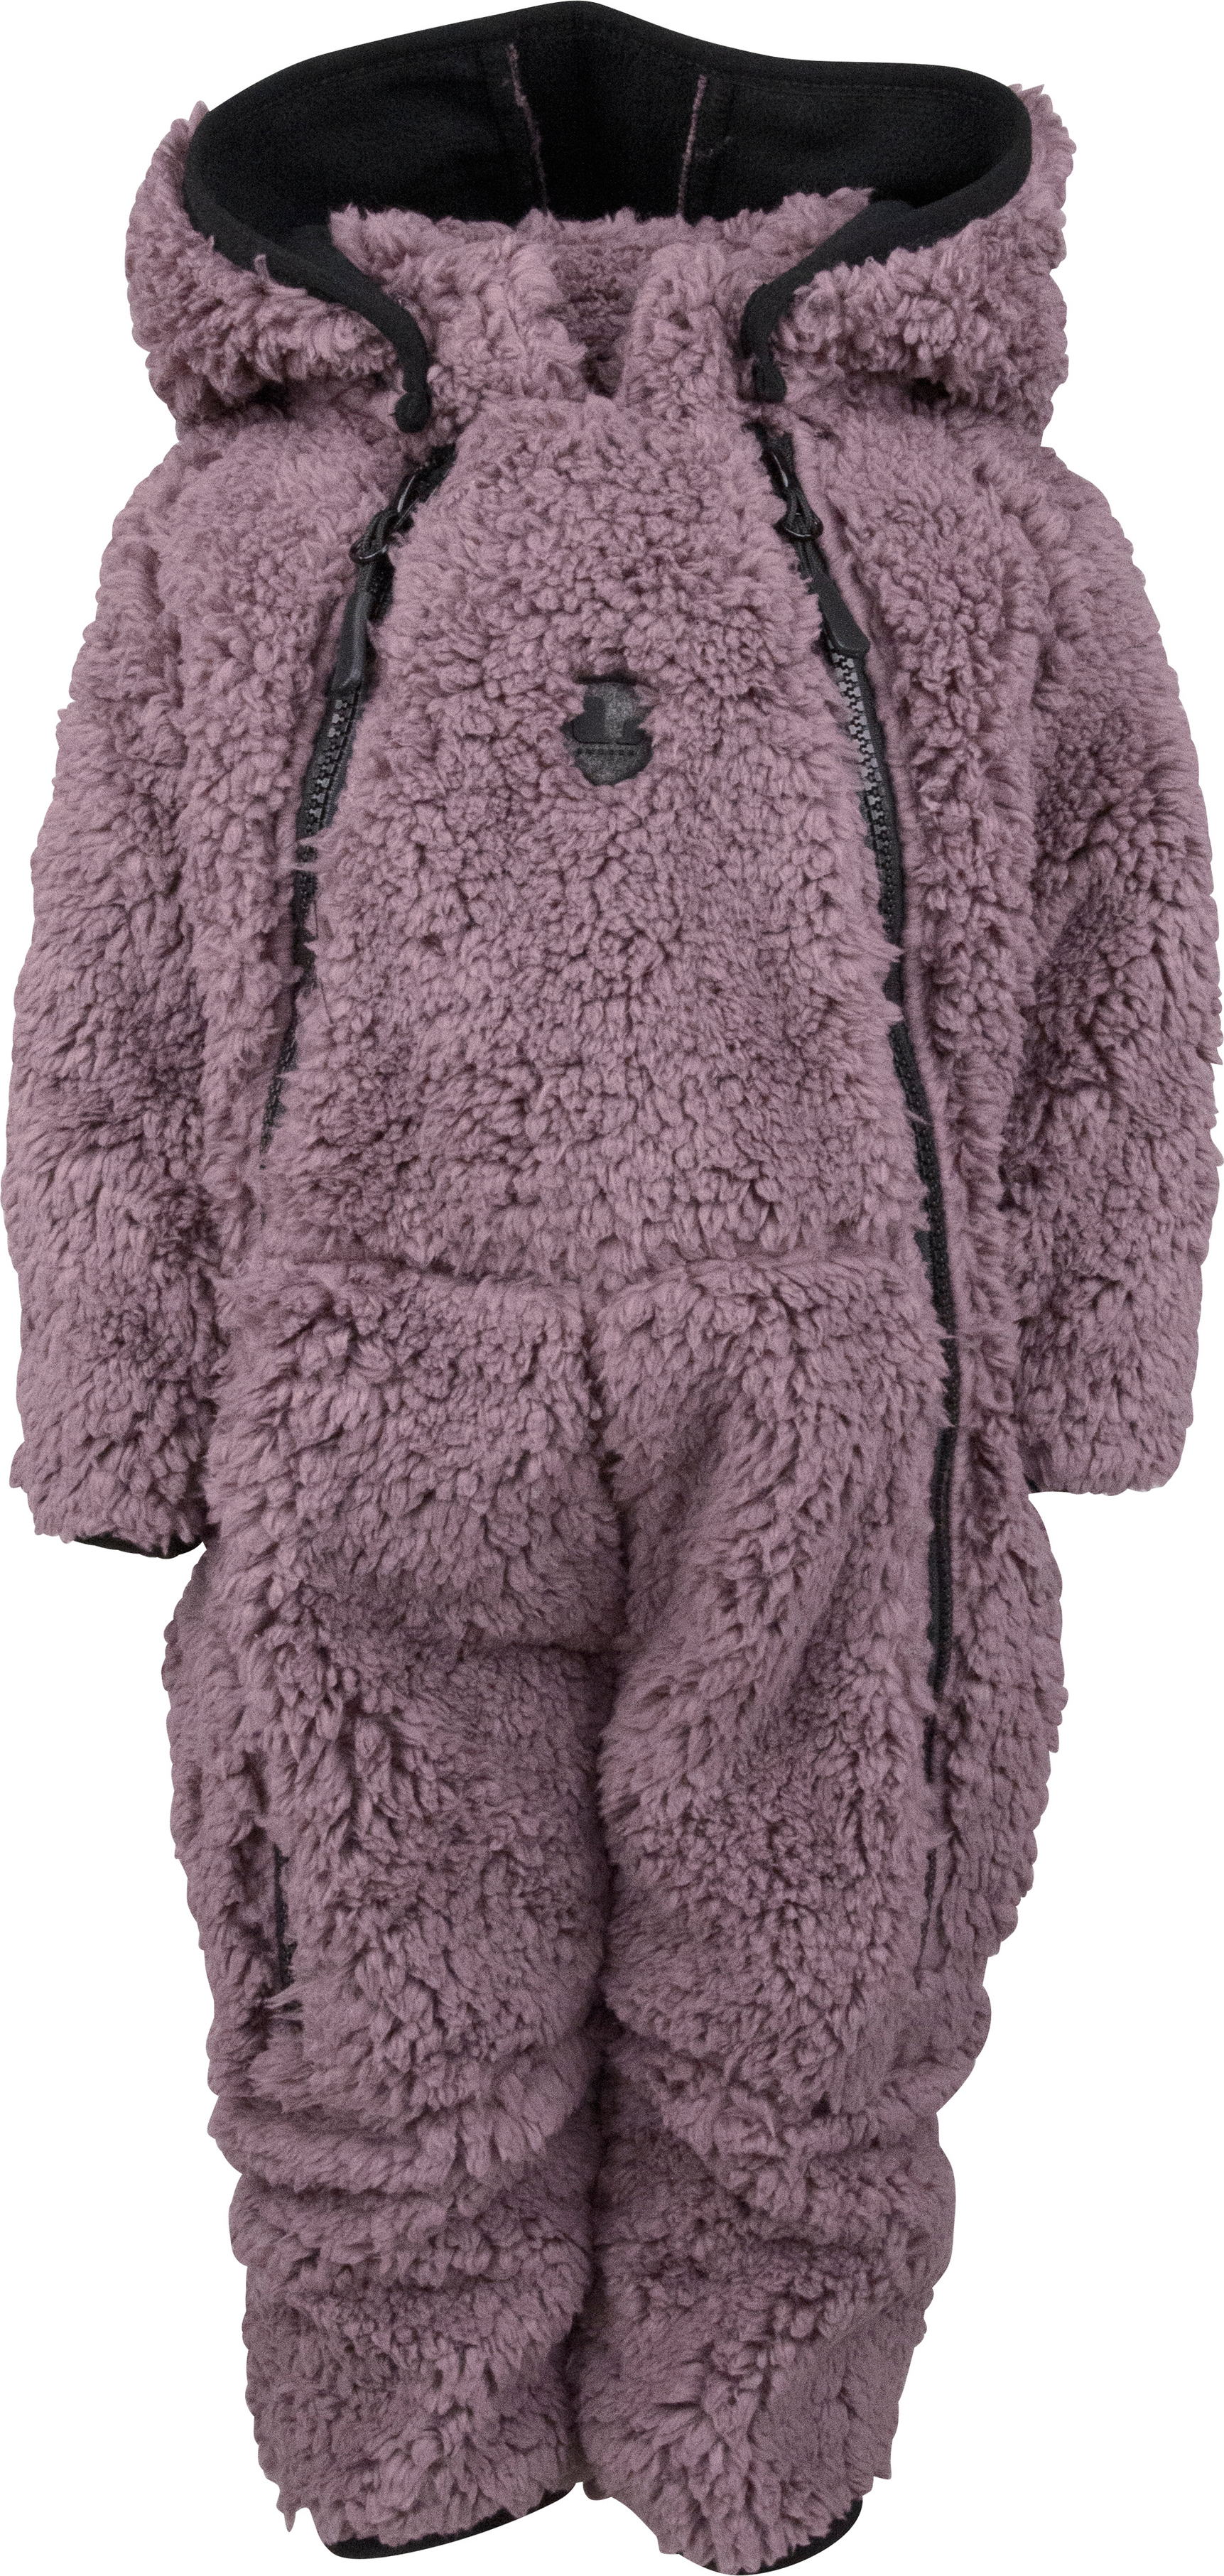 Kids' Muddus Pile Baby Overall Dusty Mauve